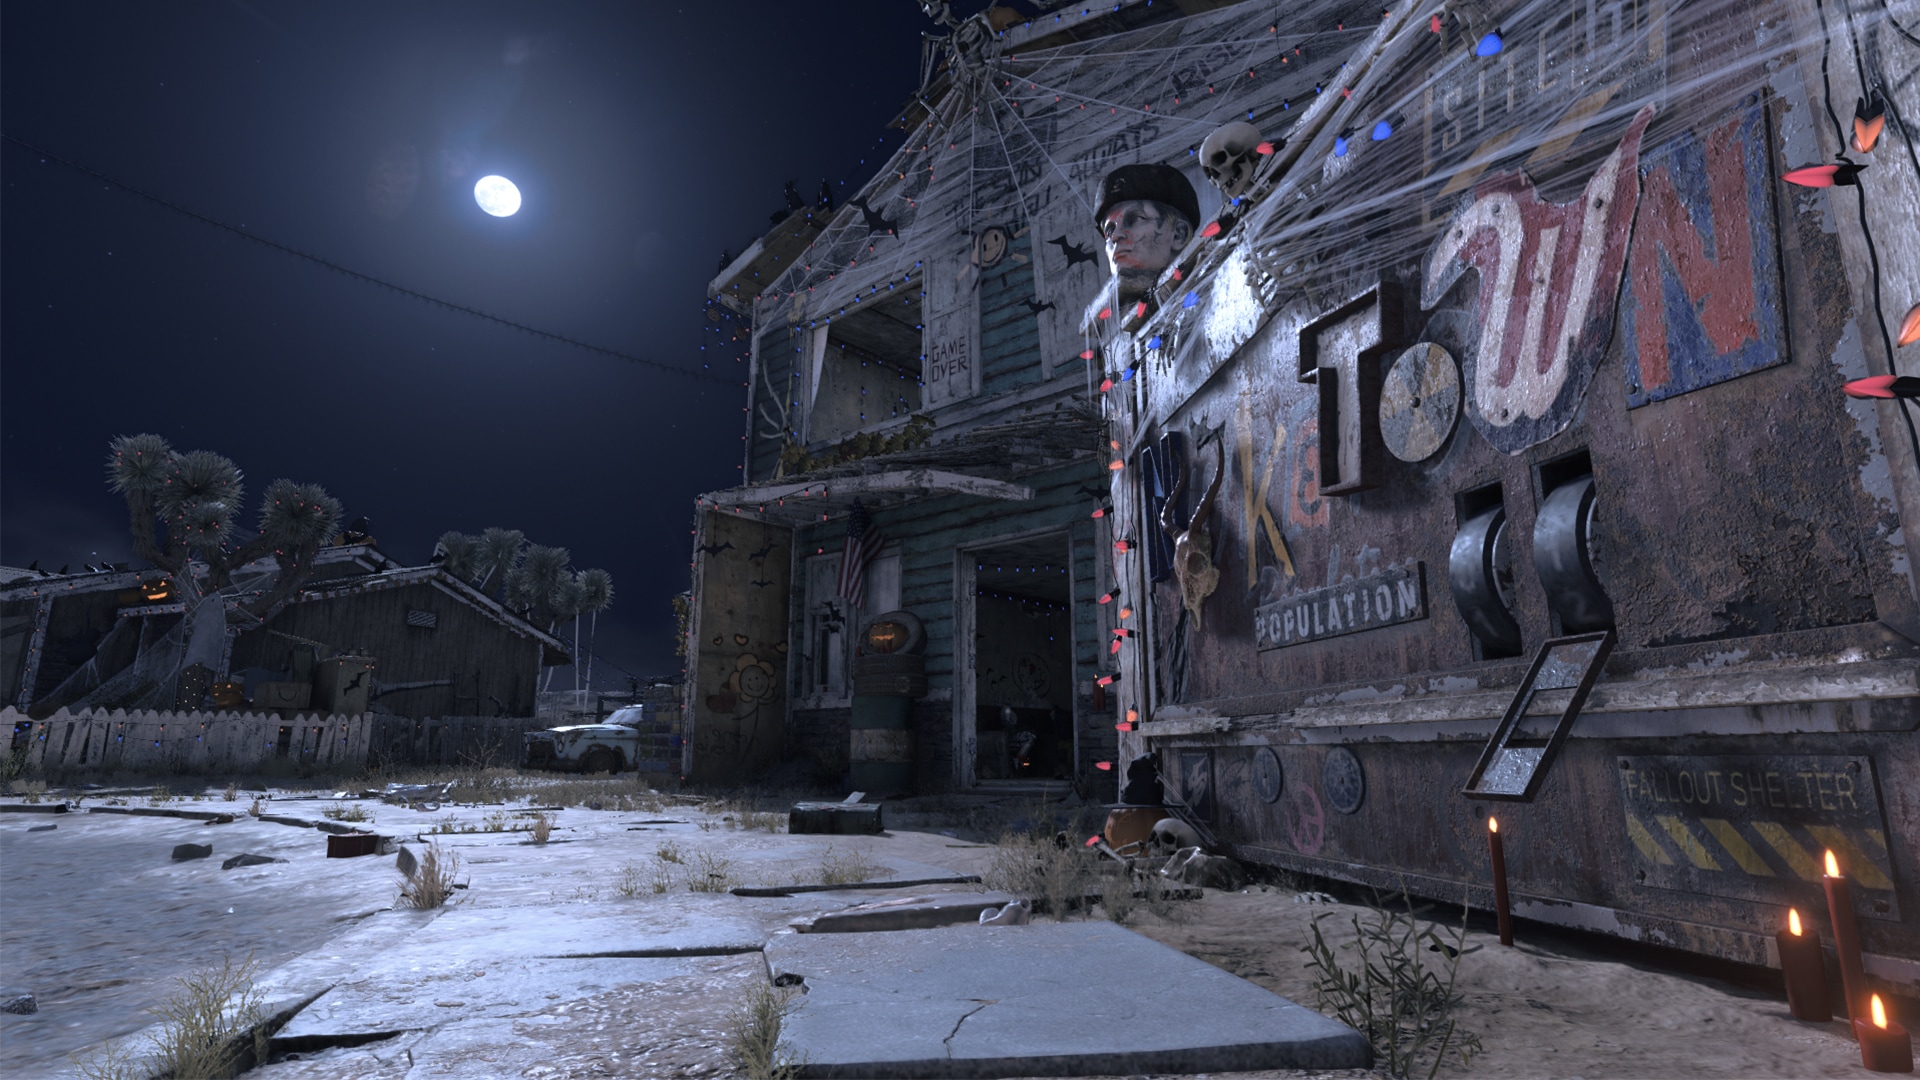 Nuketown ‘84 is now packed with decorations and scares for Halloween